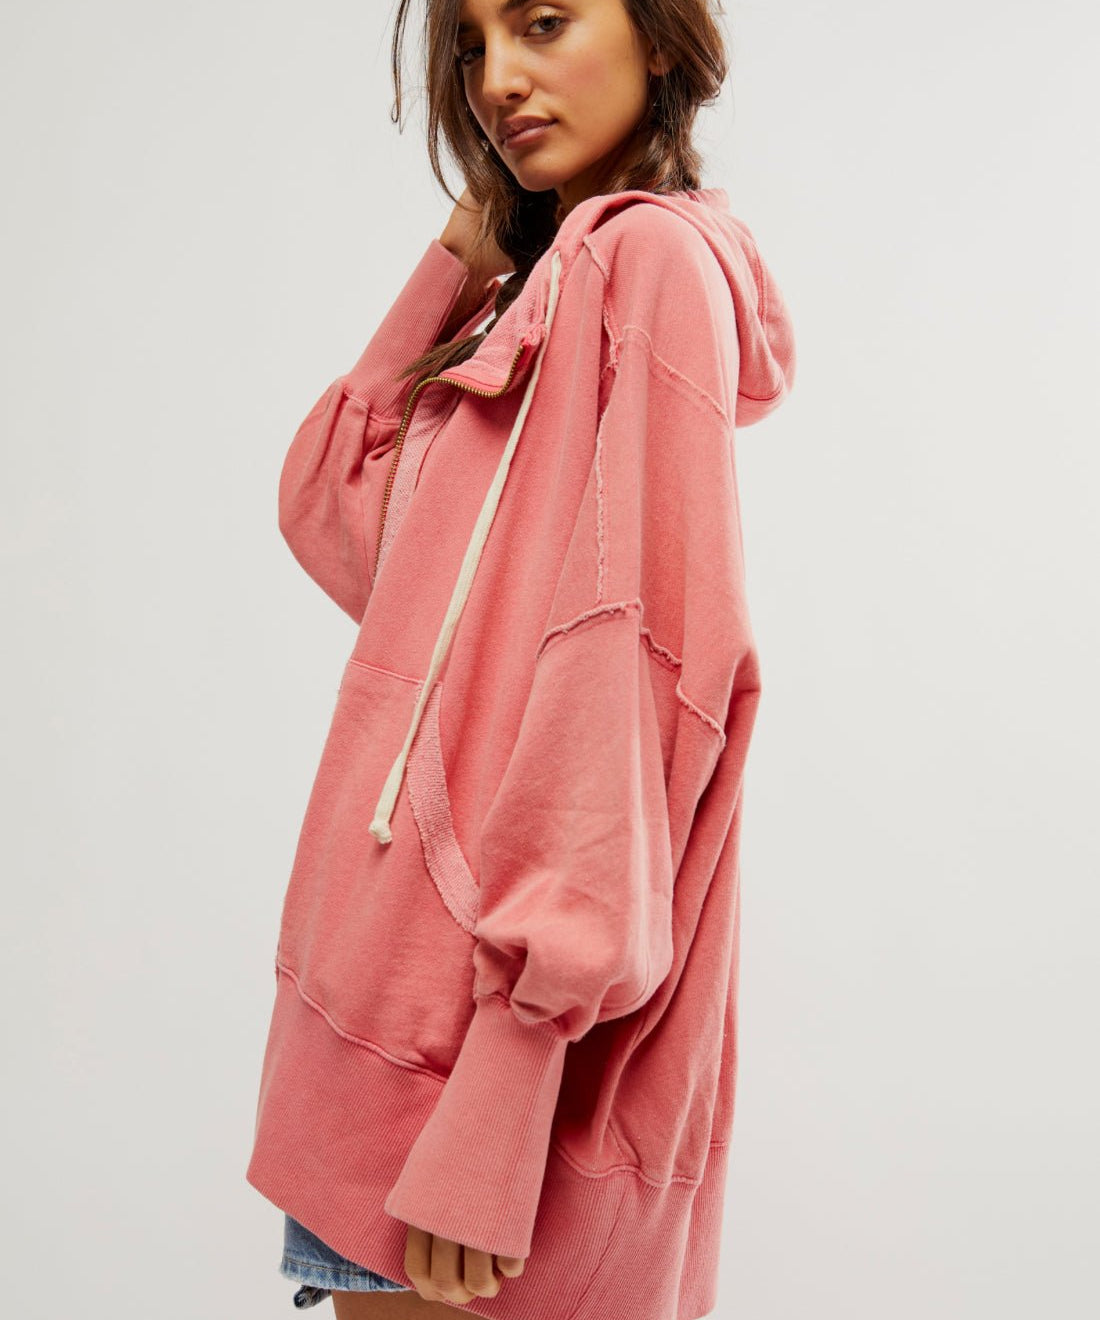 We The Free Camden Hoodie by Free People - Miami beet - Blue Sky Fashions & Lingerie